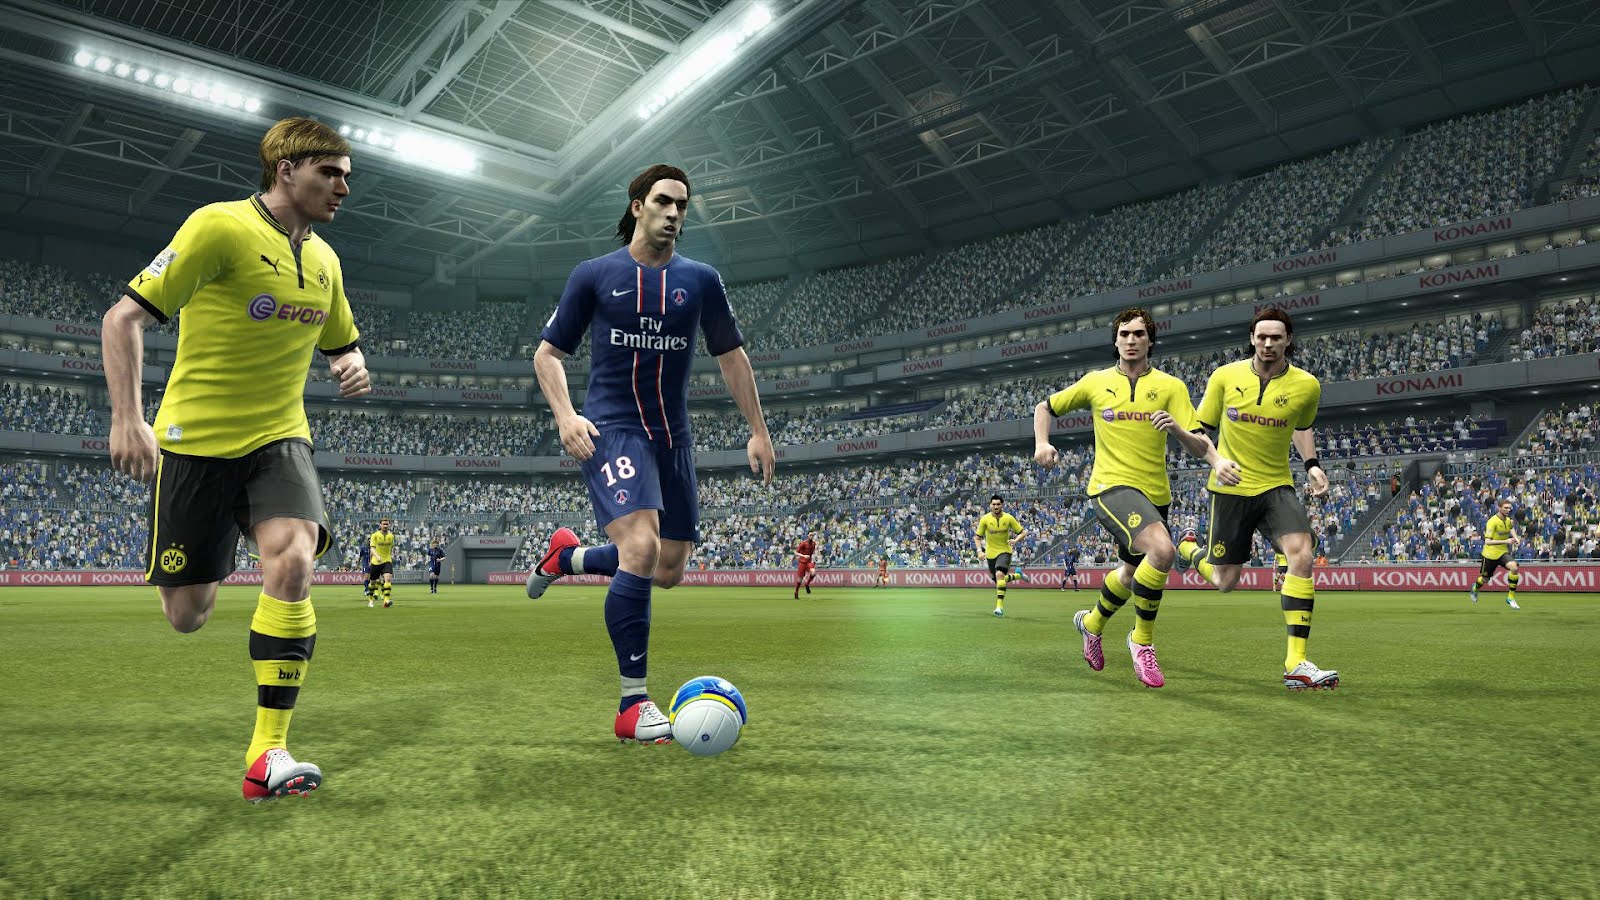 Free download pes 2013 full version for pc